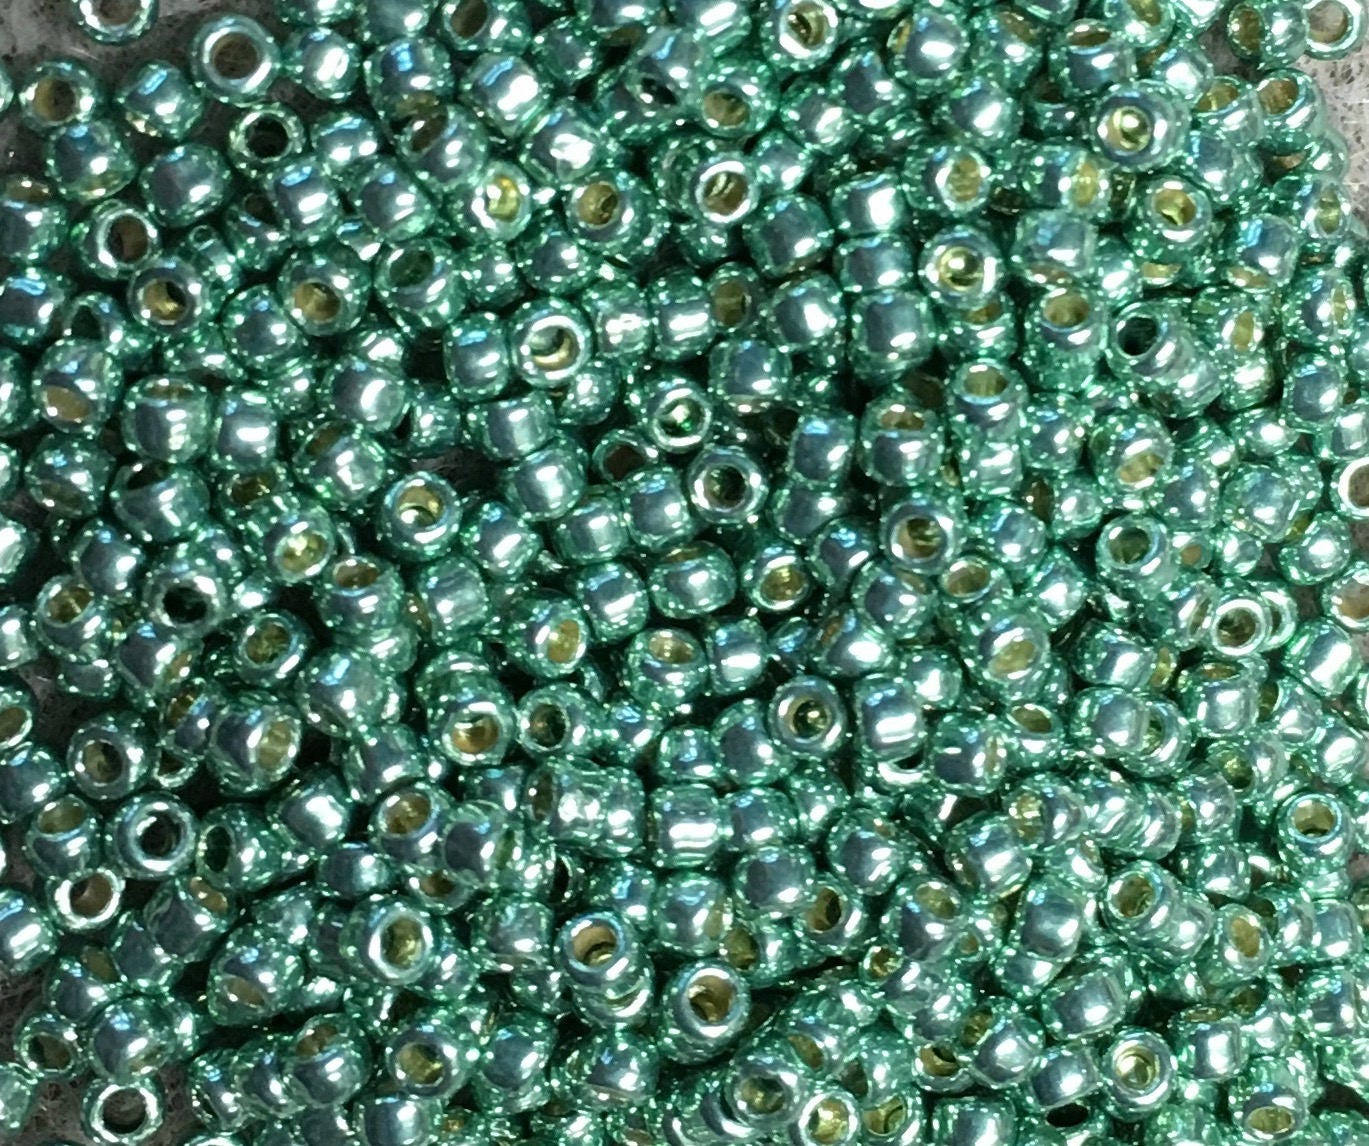 GLASS BEAD KIT Seed Bead Mix Pack 2-4mm Beads 45g or 1.6oz Package